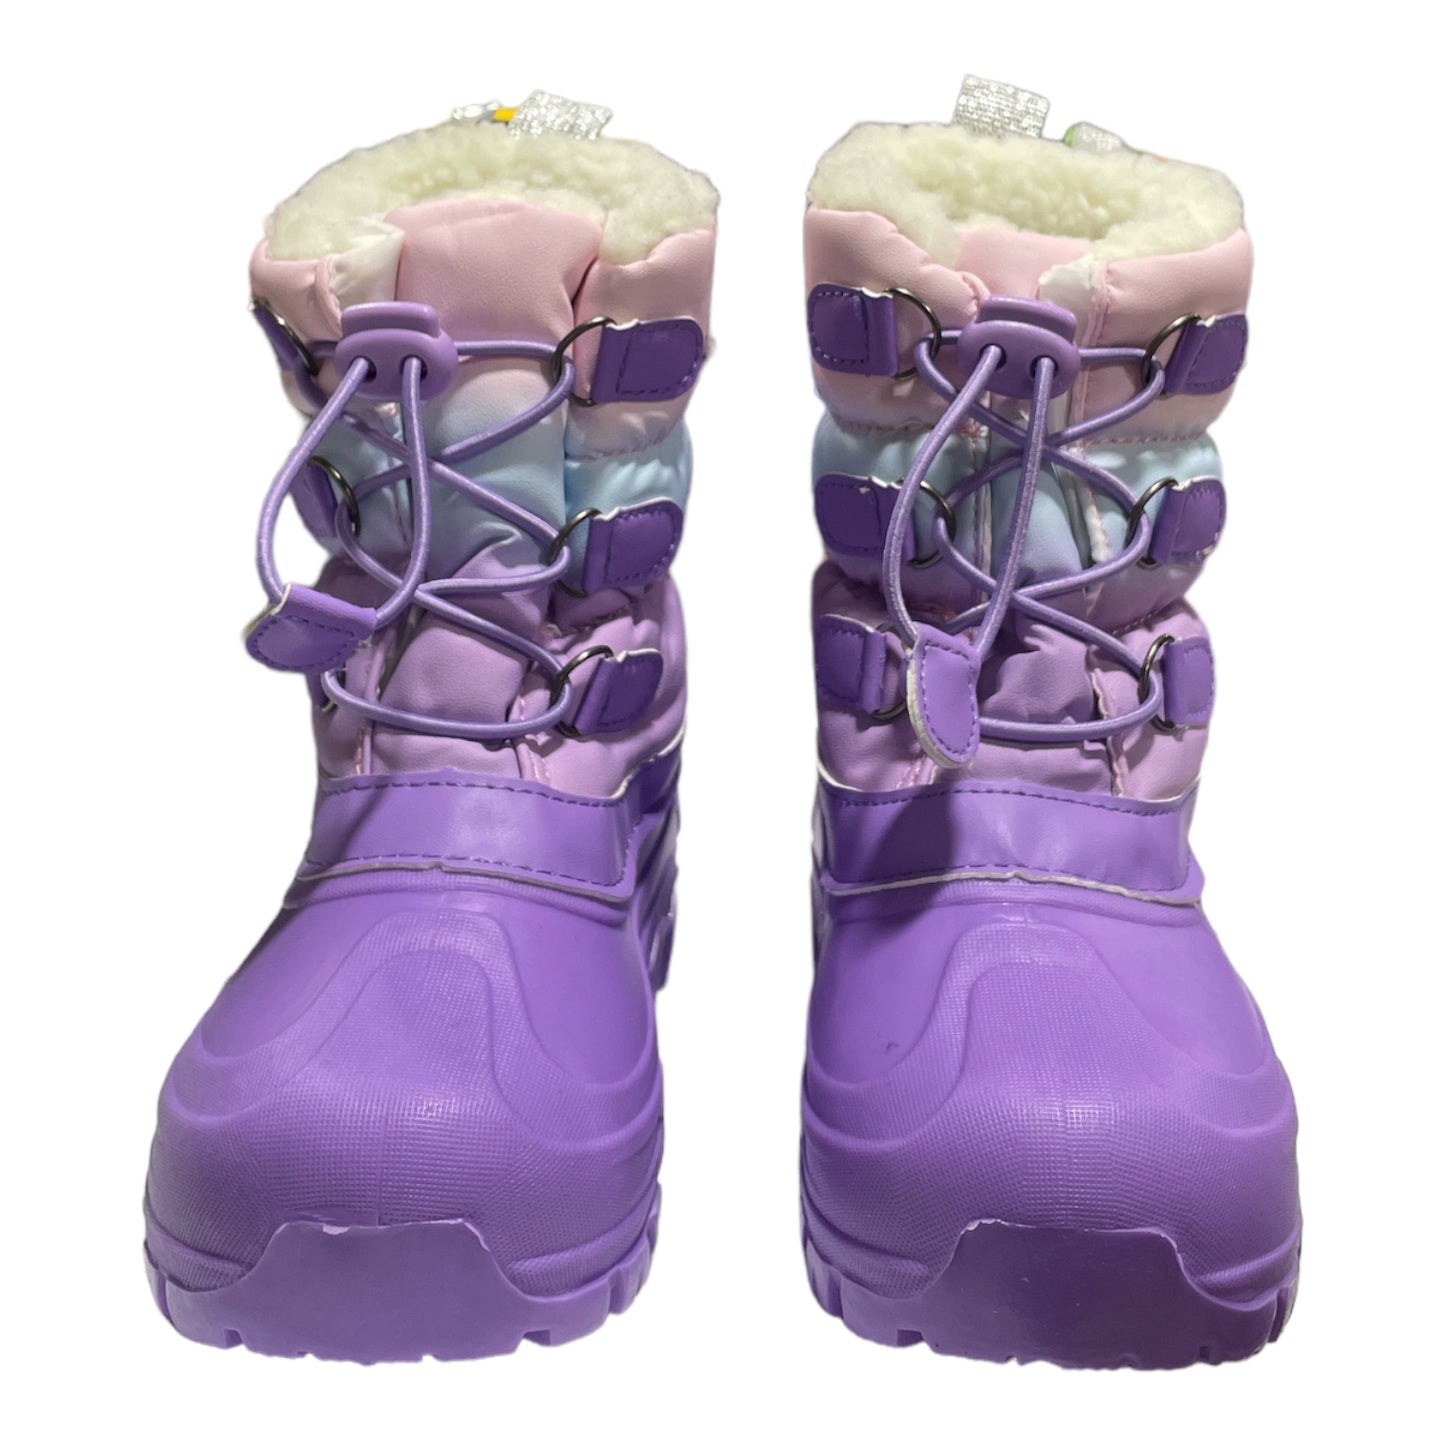 Member's Mark Girl's Faux Fur Lined Toggle Closure Winter Snow Boots